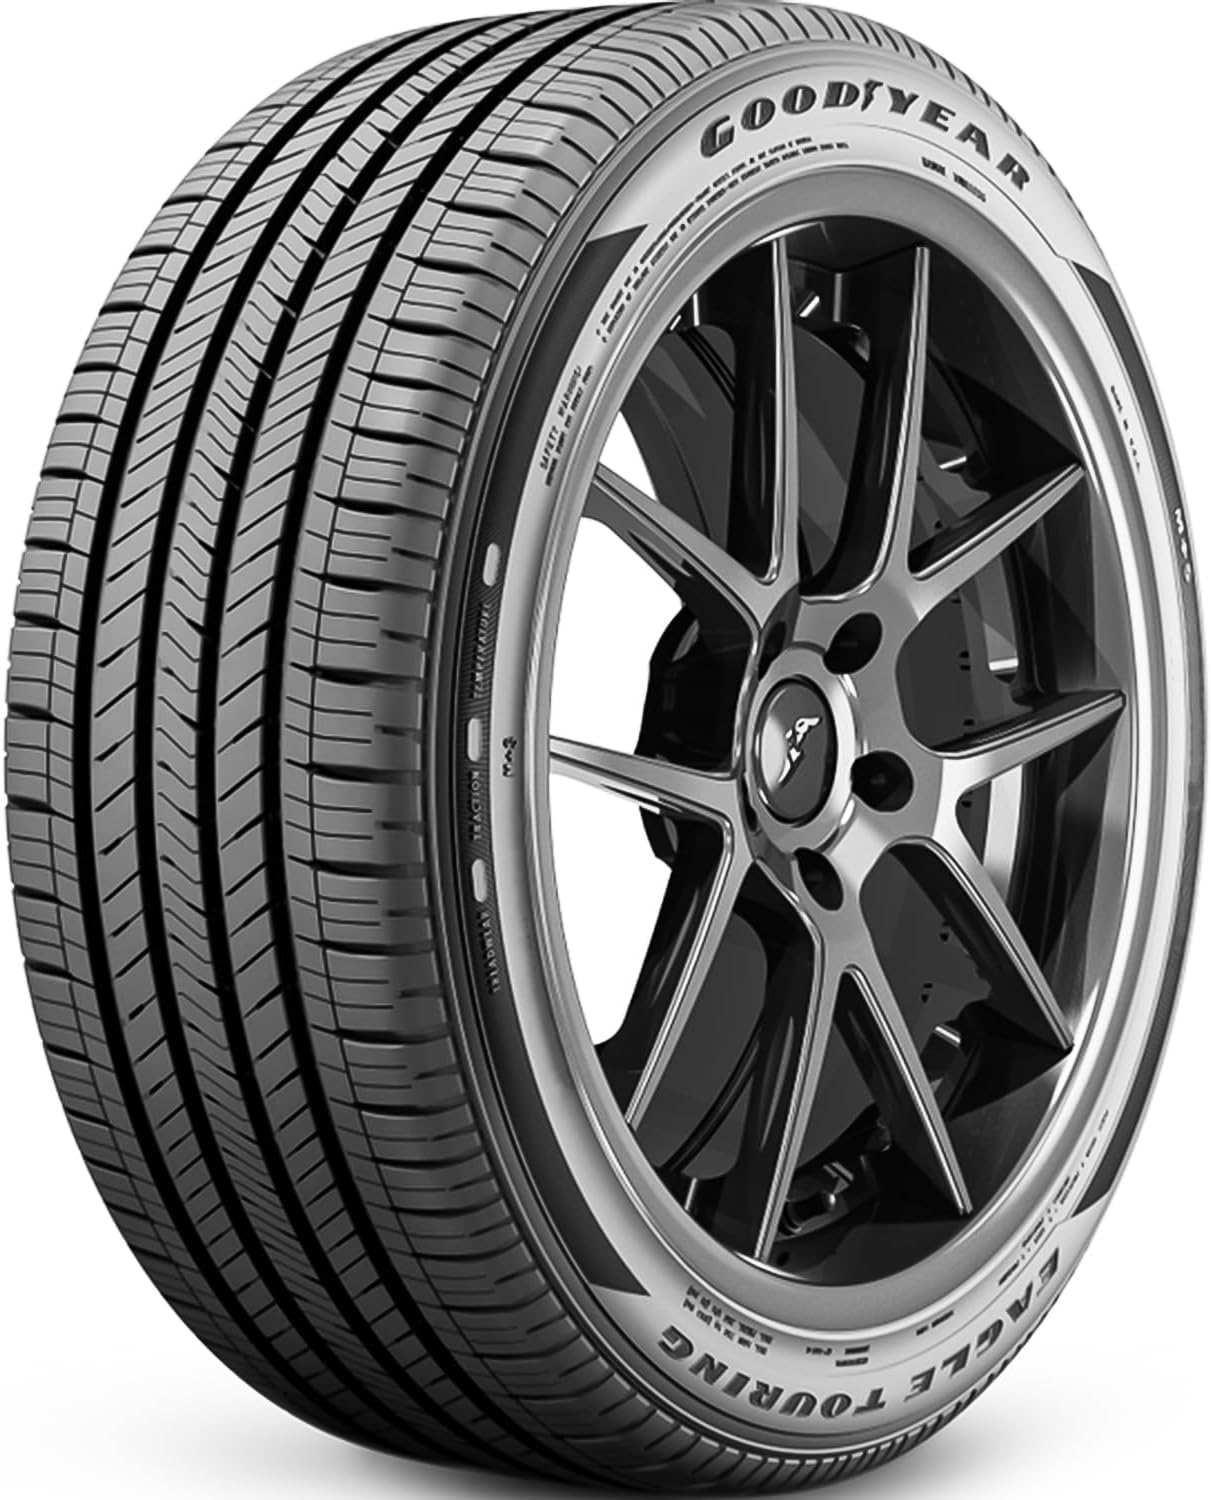 Goodyear Eagle Touring Tire-285/45R22 114H Review